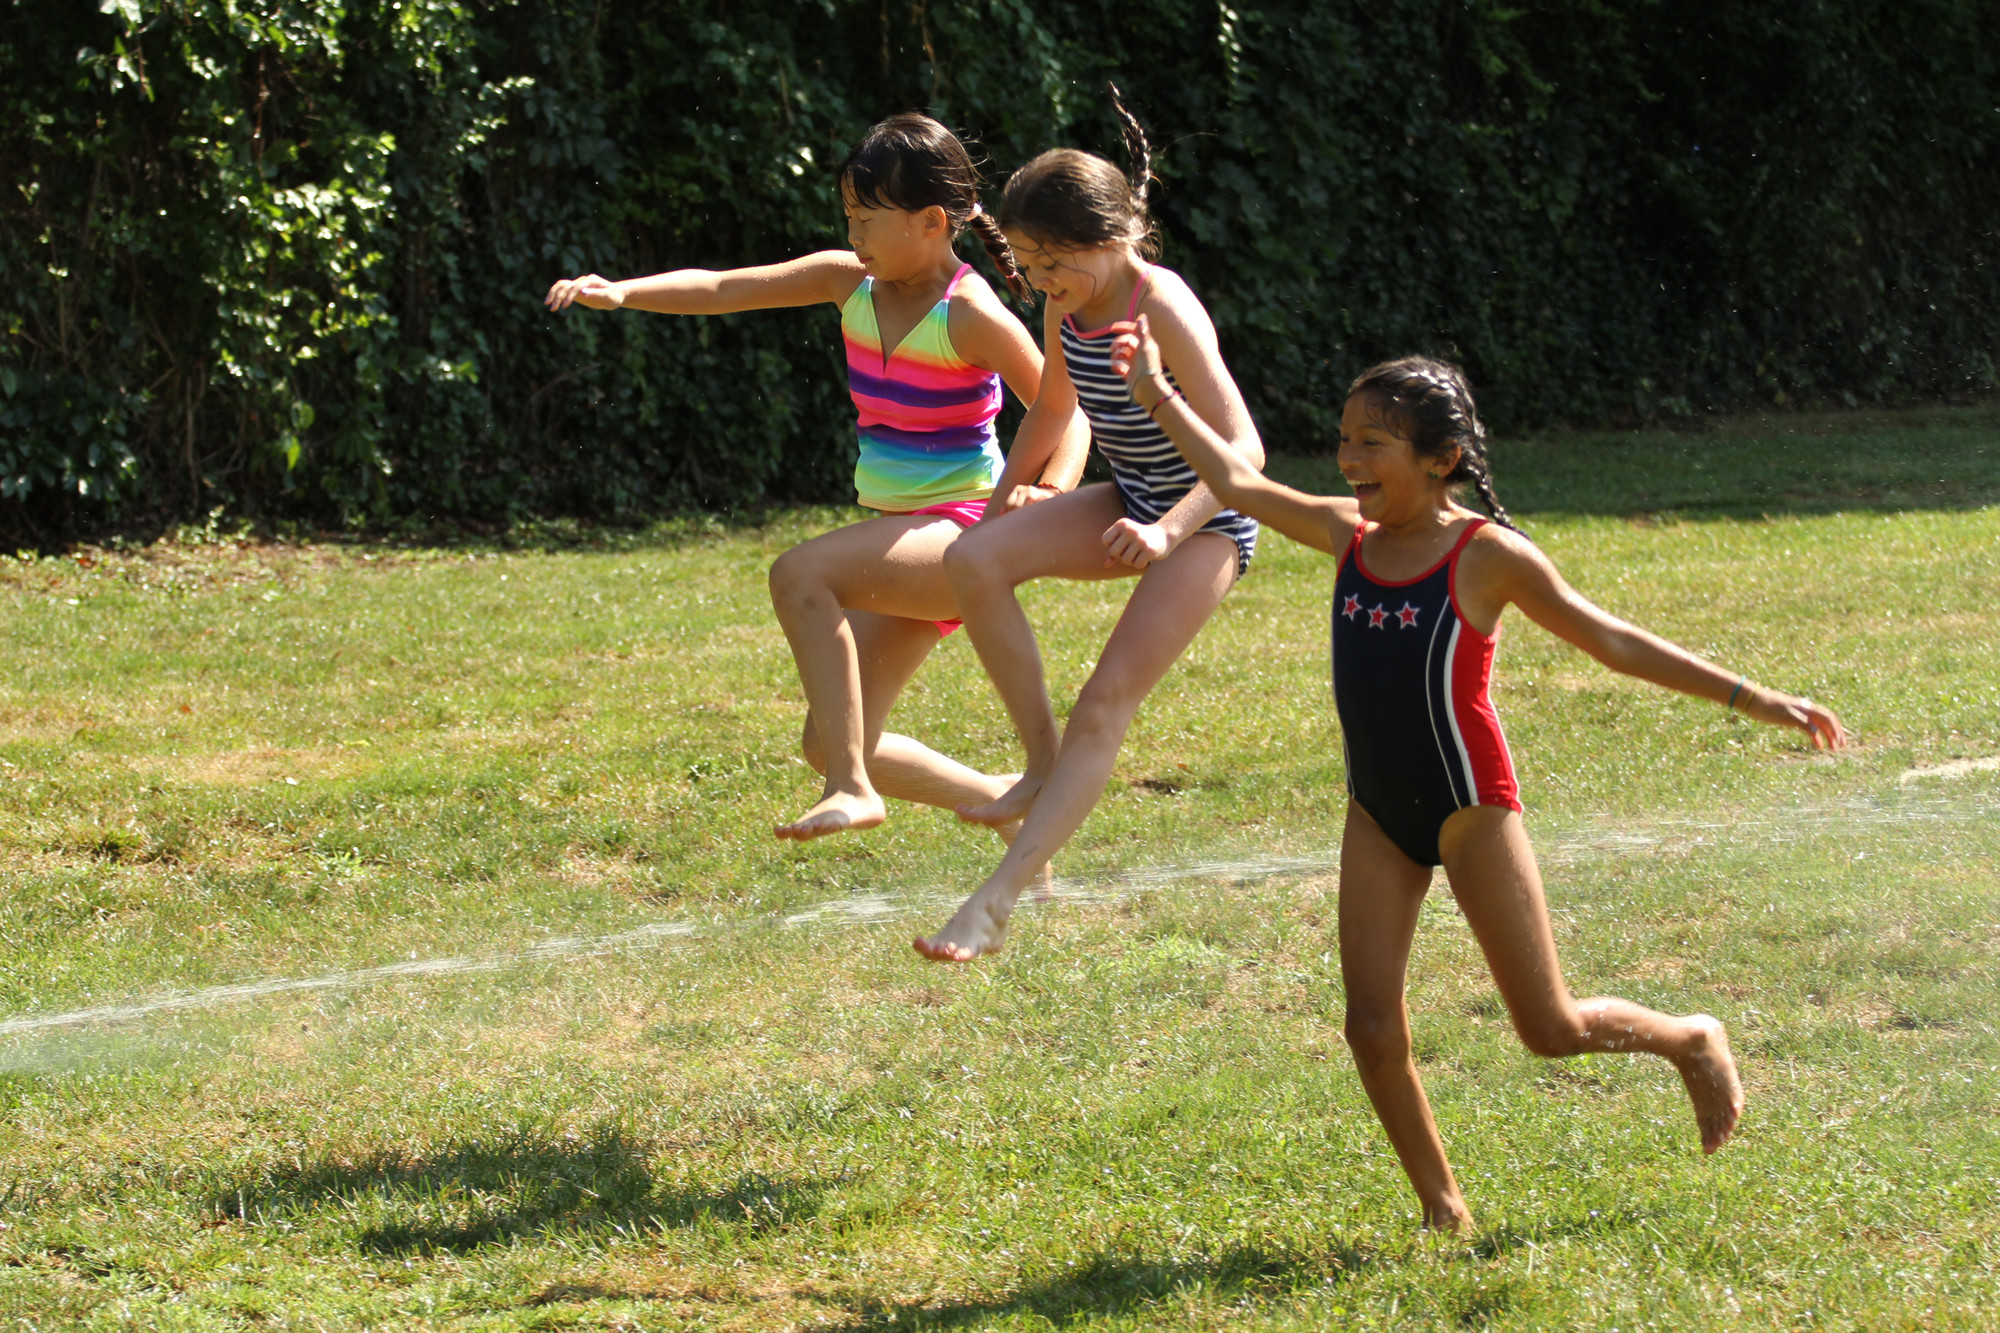 Maya MacNair, left, Kaitlin Sullivan and Ana Patchke jumped over one of the sprinkler streams.